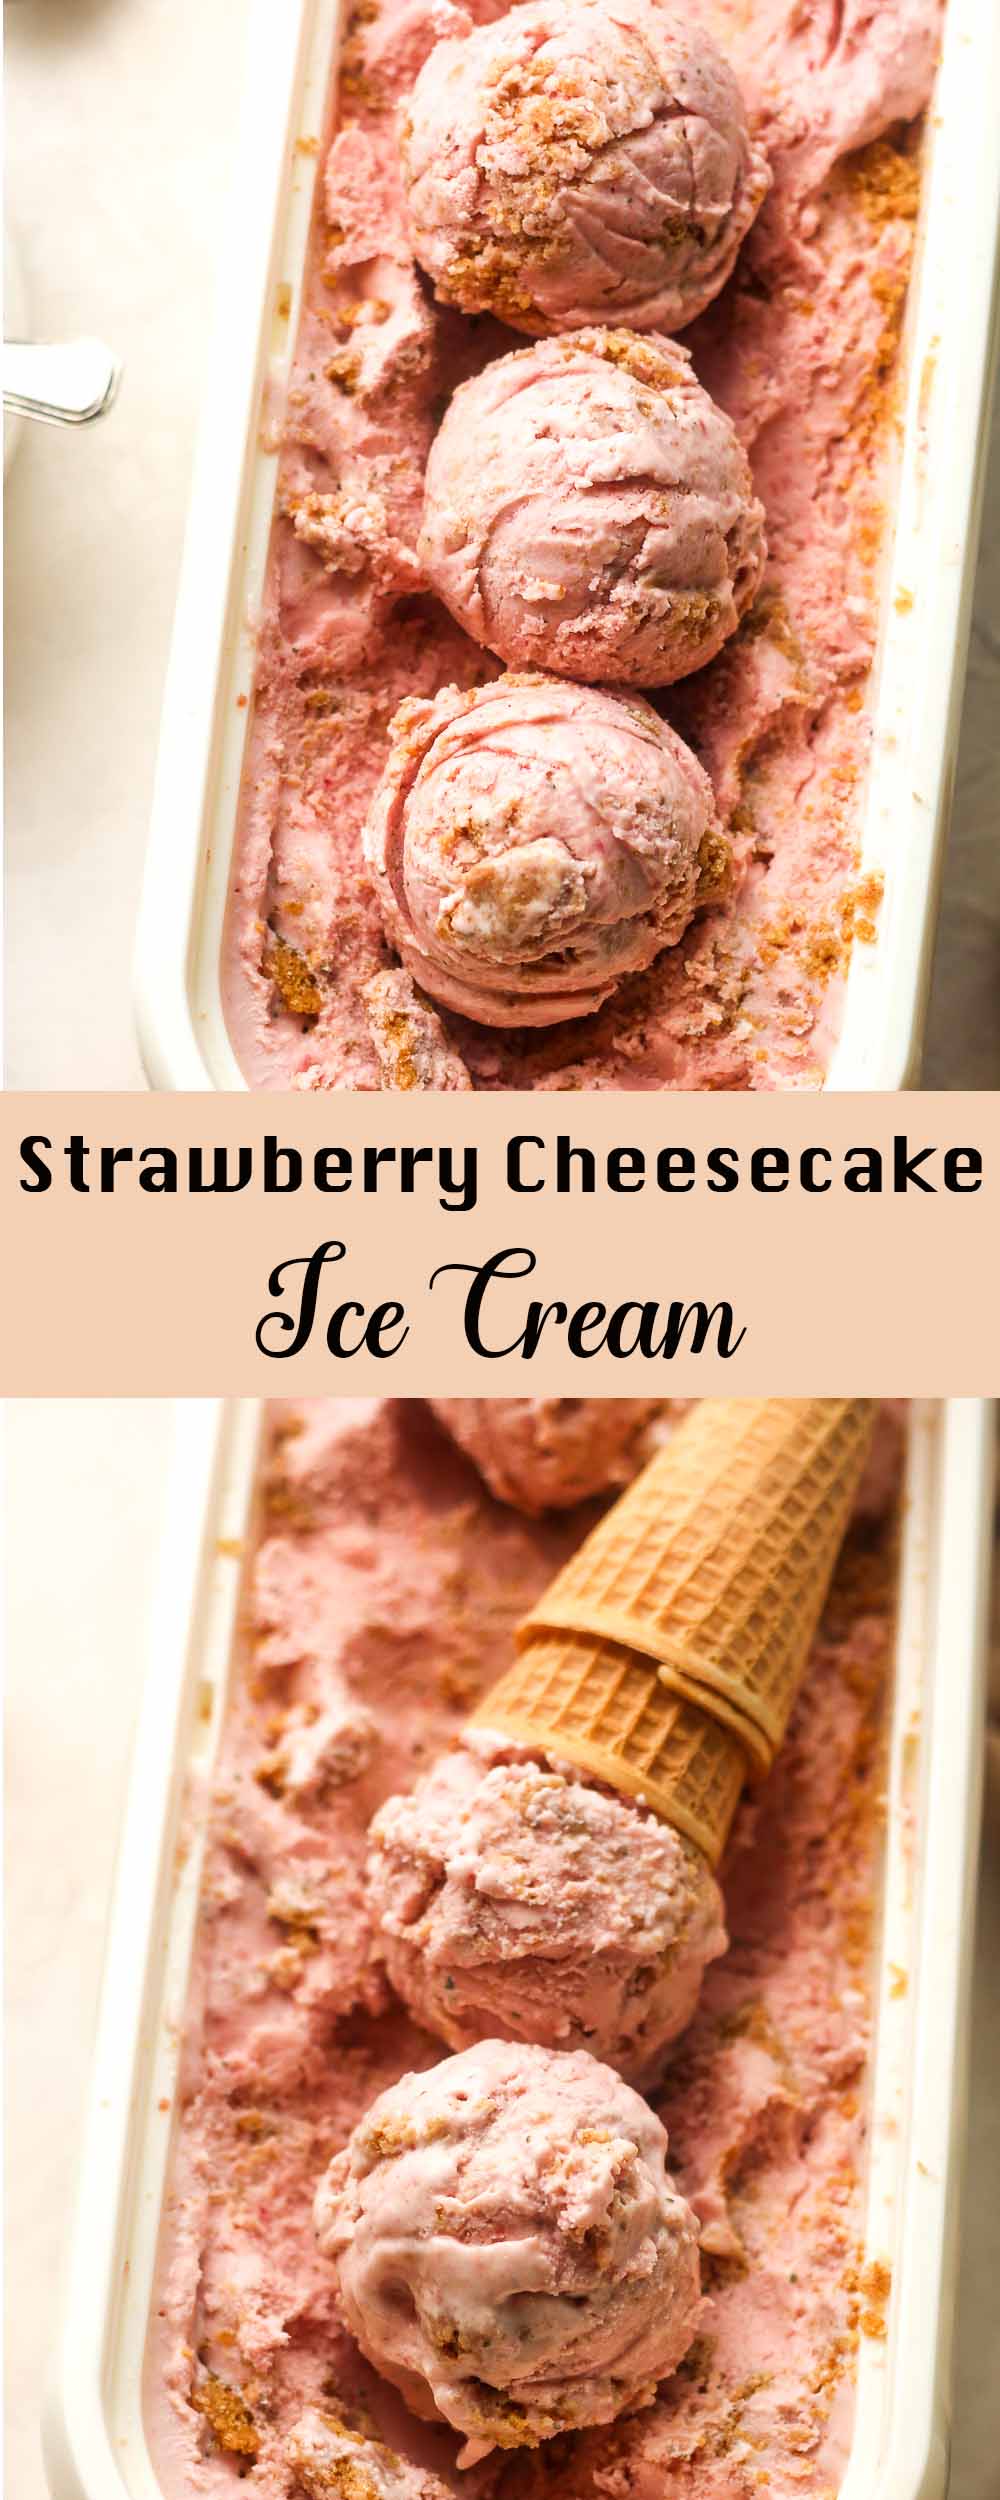 A collage of scoops of strawberry cheesecake ice cream.